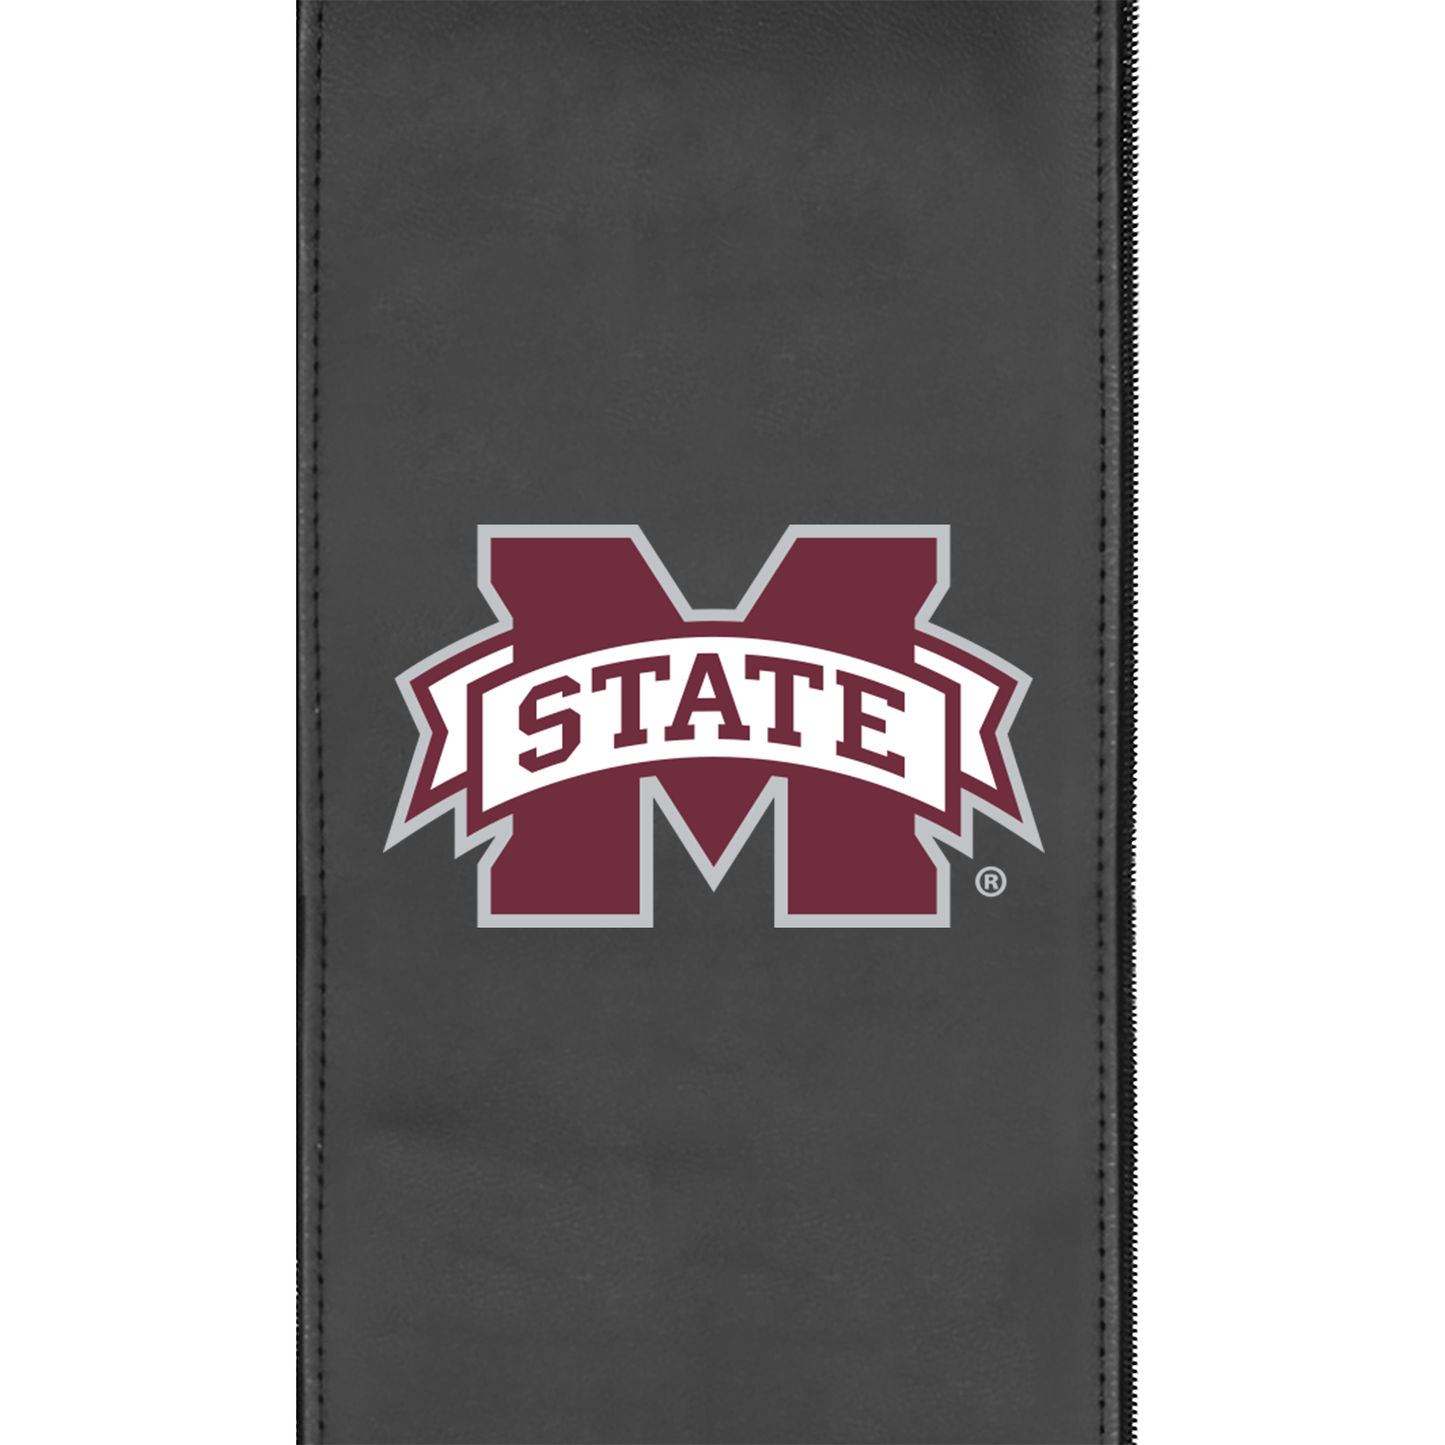 Silver Club Chair with Mississippi State Primary